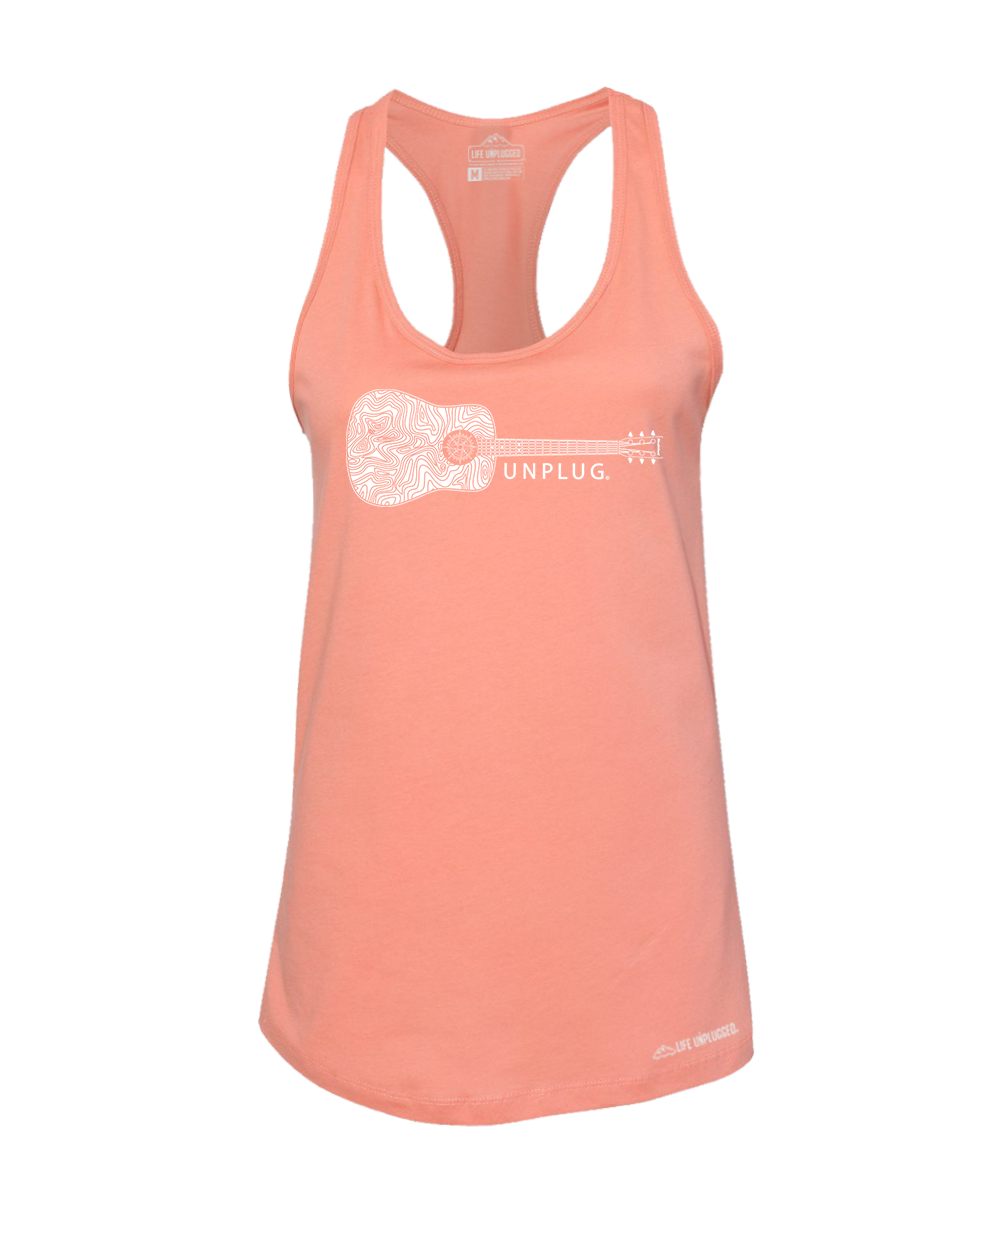 Guitar Premium Women's Relaxed Fit Racerback Tank Top - Life Unplugged